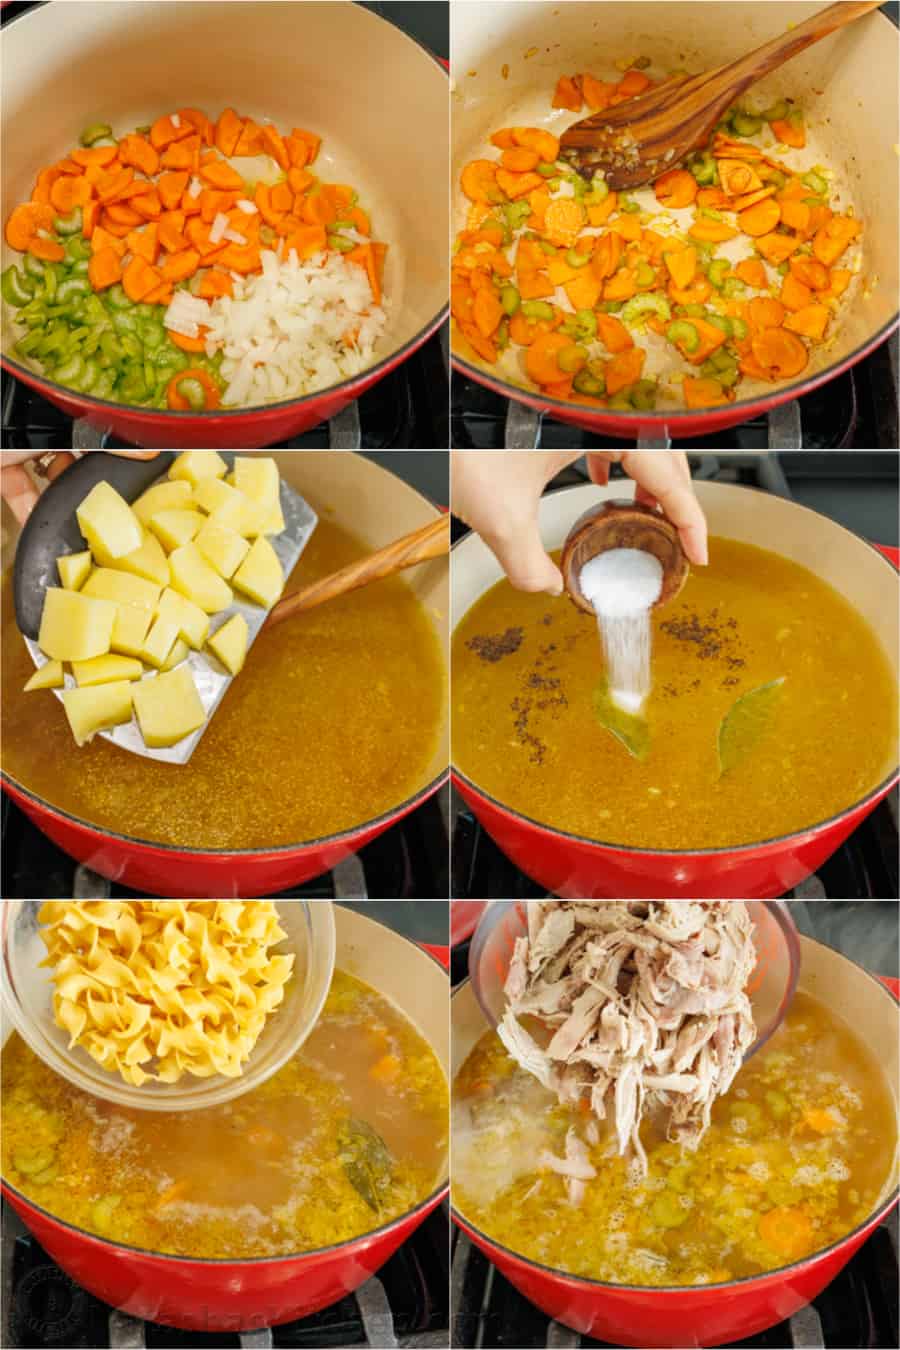 How to make easy turkey noodle soup, step by step photos. Sautee vegetables, add broth and potatoes, season, add egg noodles, and finally add turkey